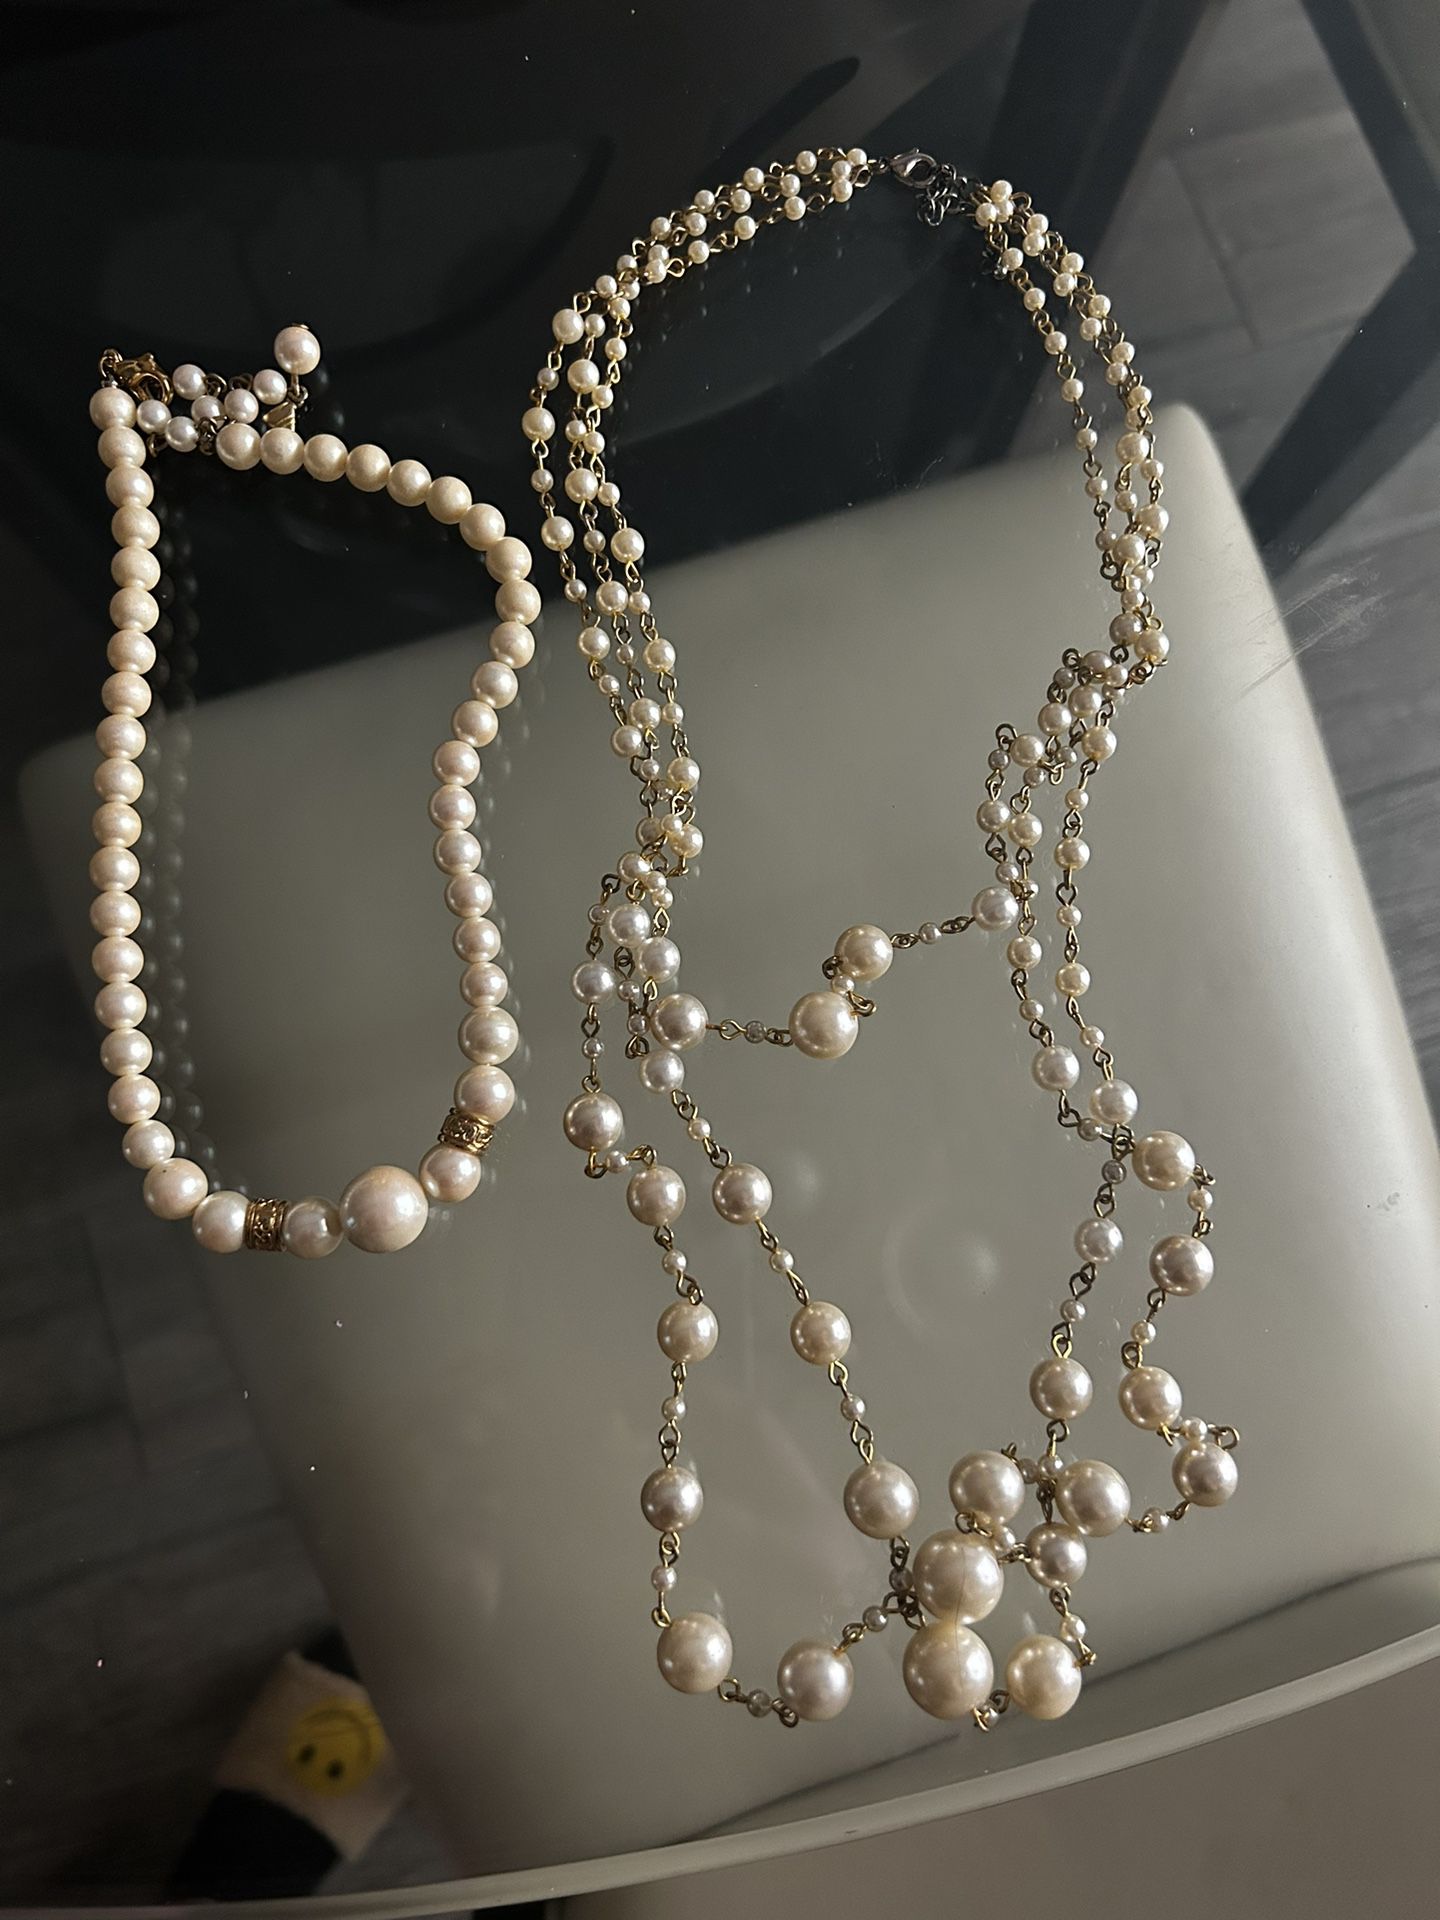 Pearl Necklaces Along With Set Of Pearl Earnings.